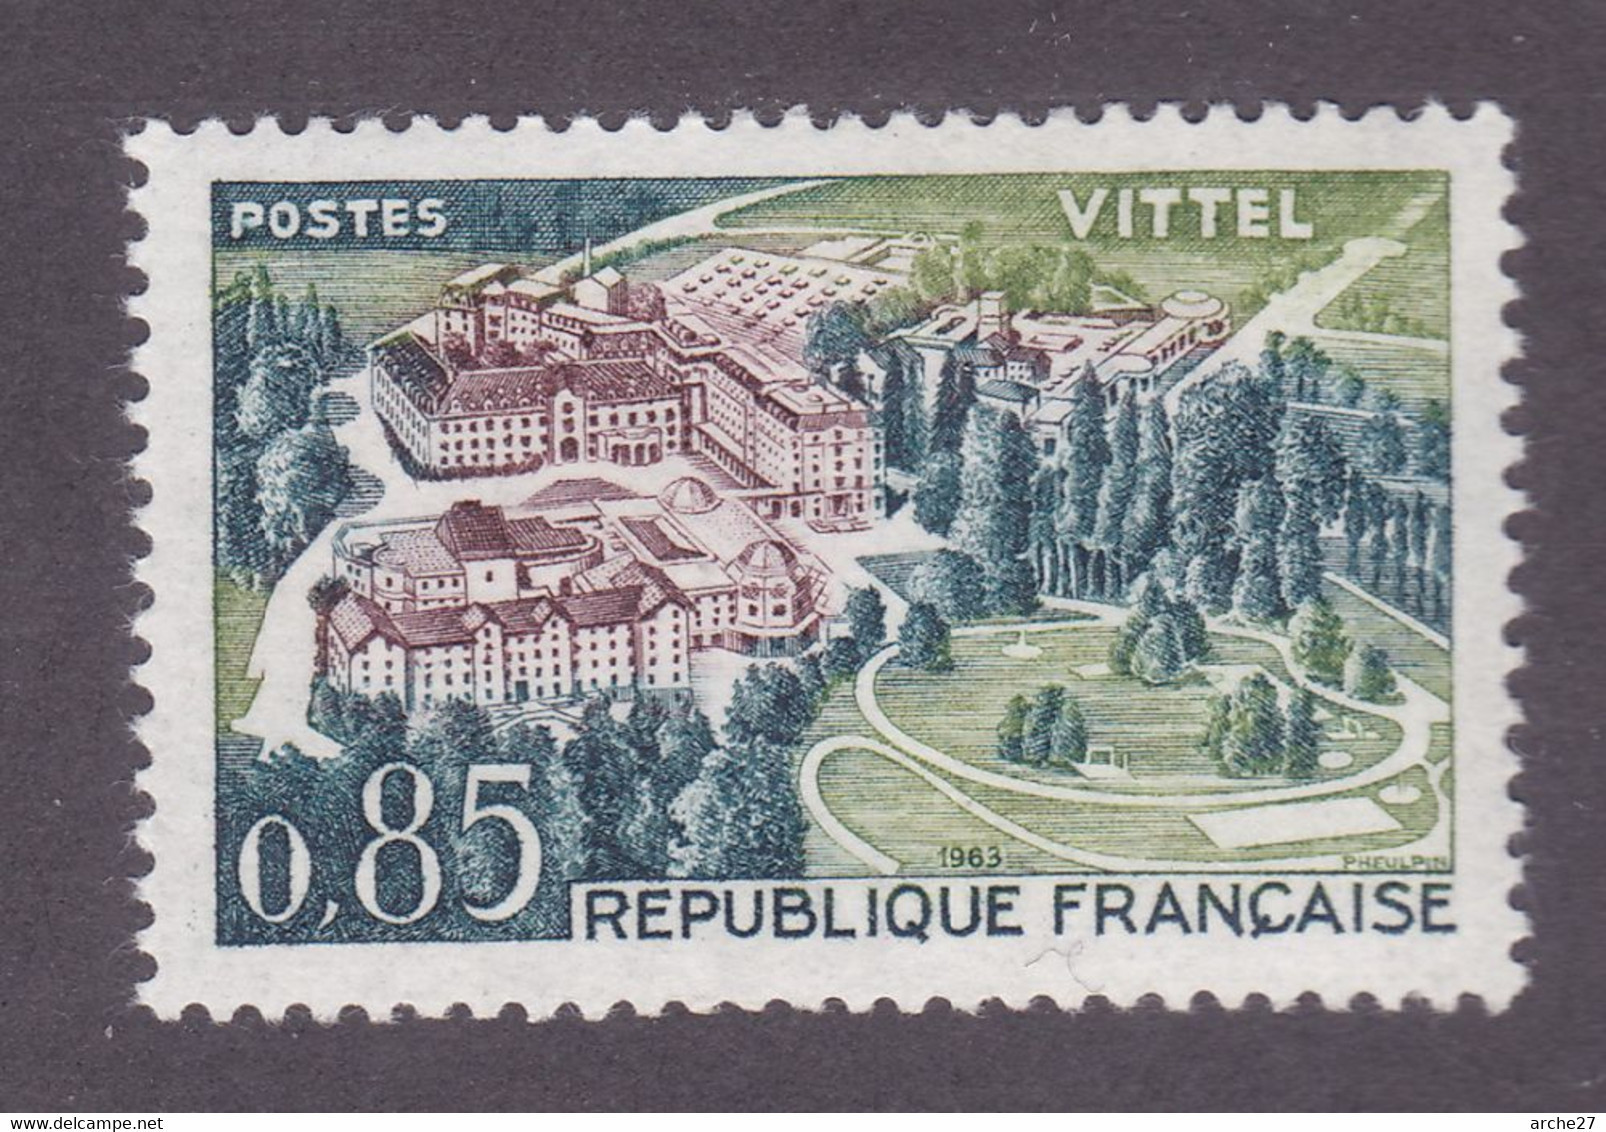 TIMBRE FRANCE N° 1393 NEUF ** - Neufs